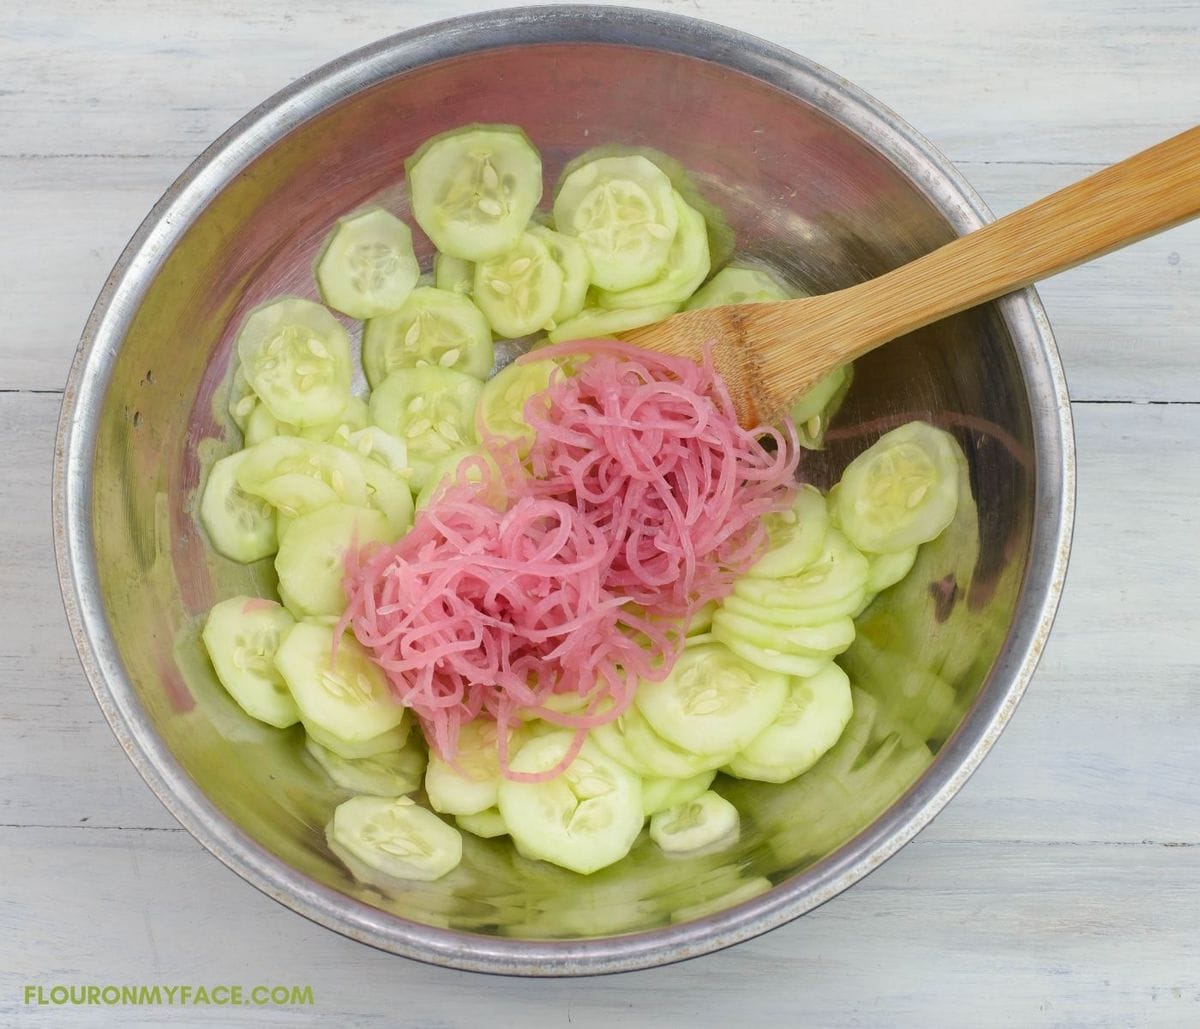 A bowl of sliced cucumbers and pickled red onions.